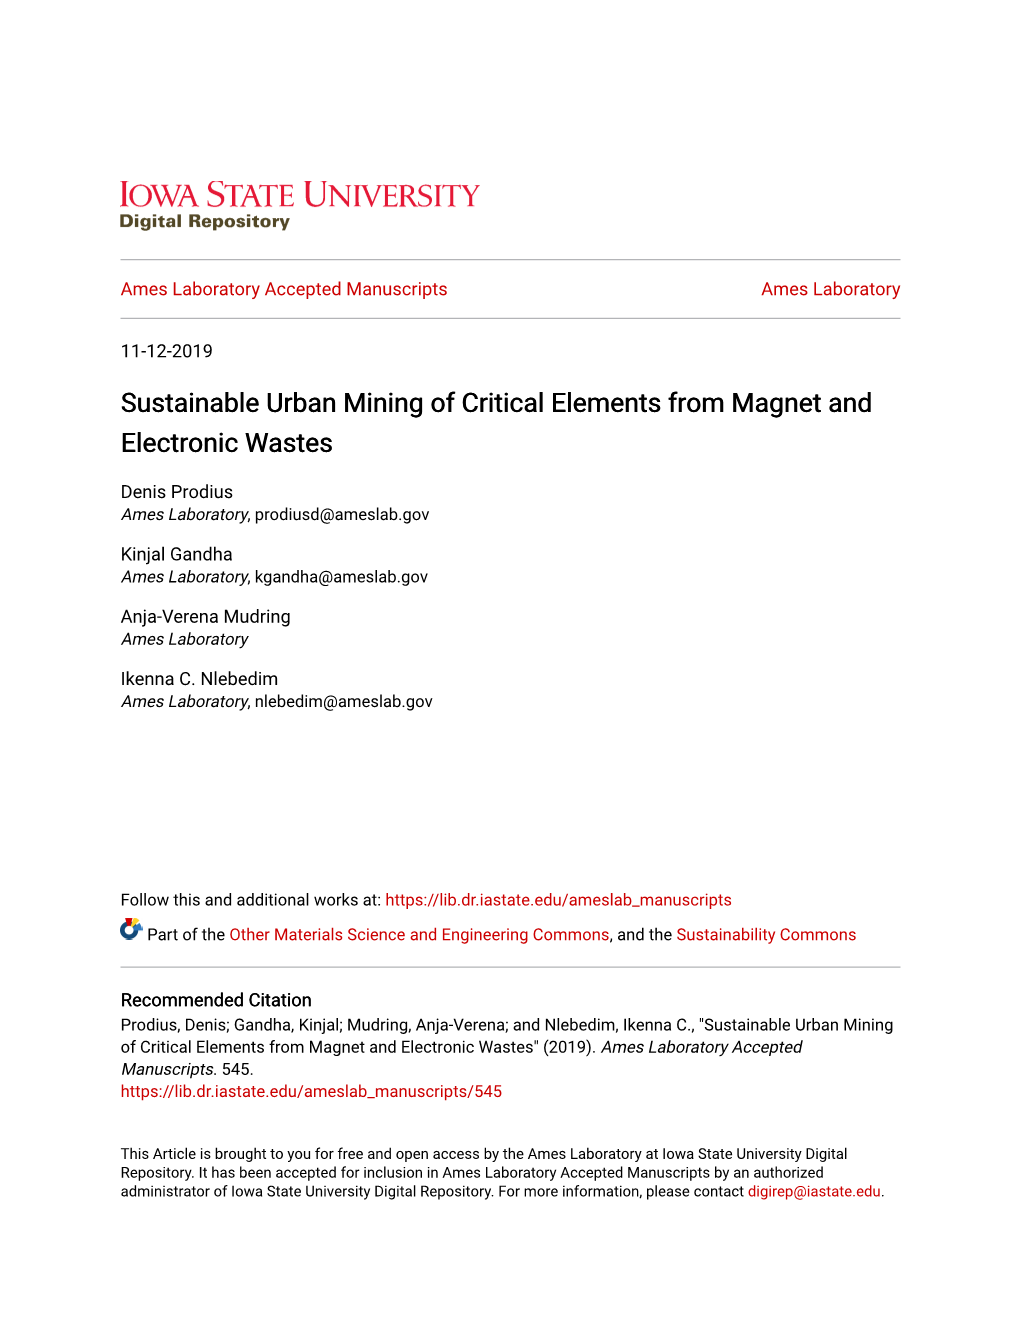 Sustainable Urban Mining of Critical Elements from Magnet and Electronic Wastes